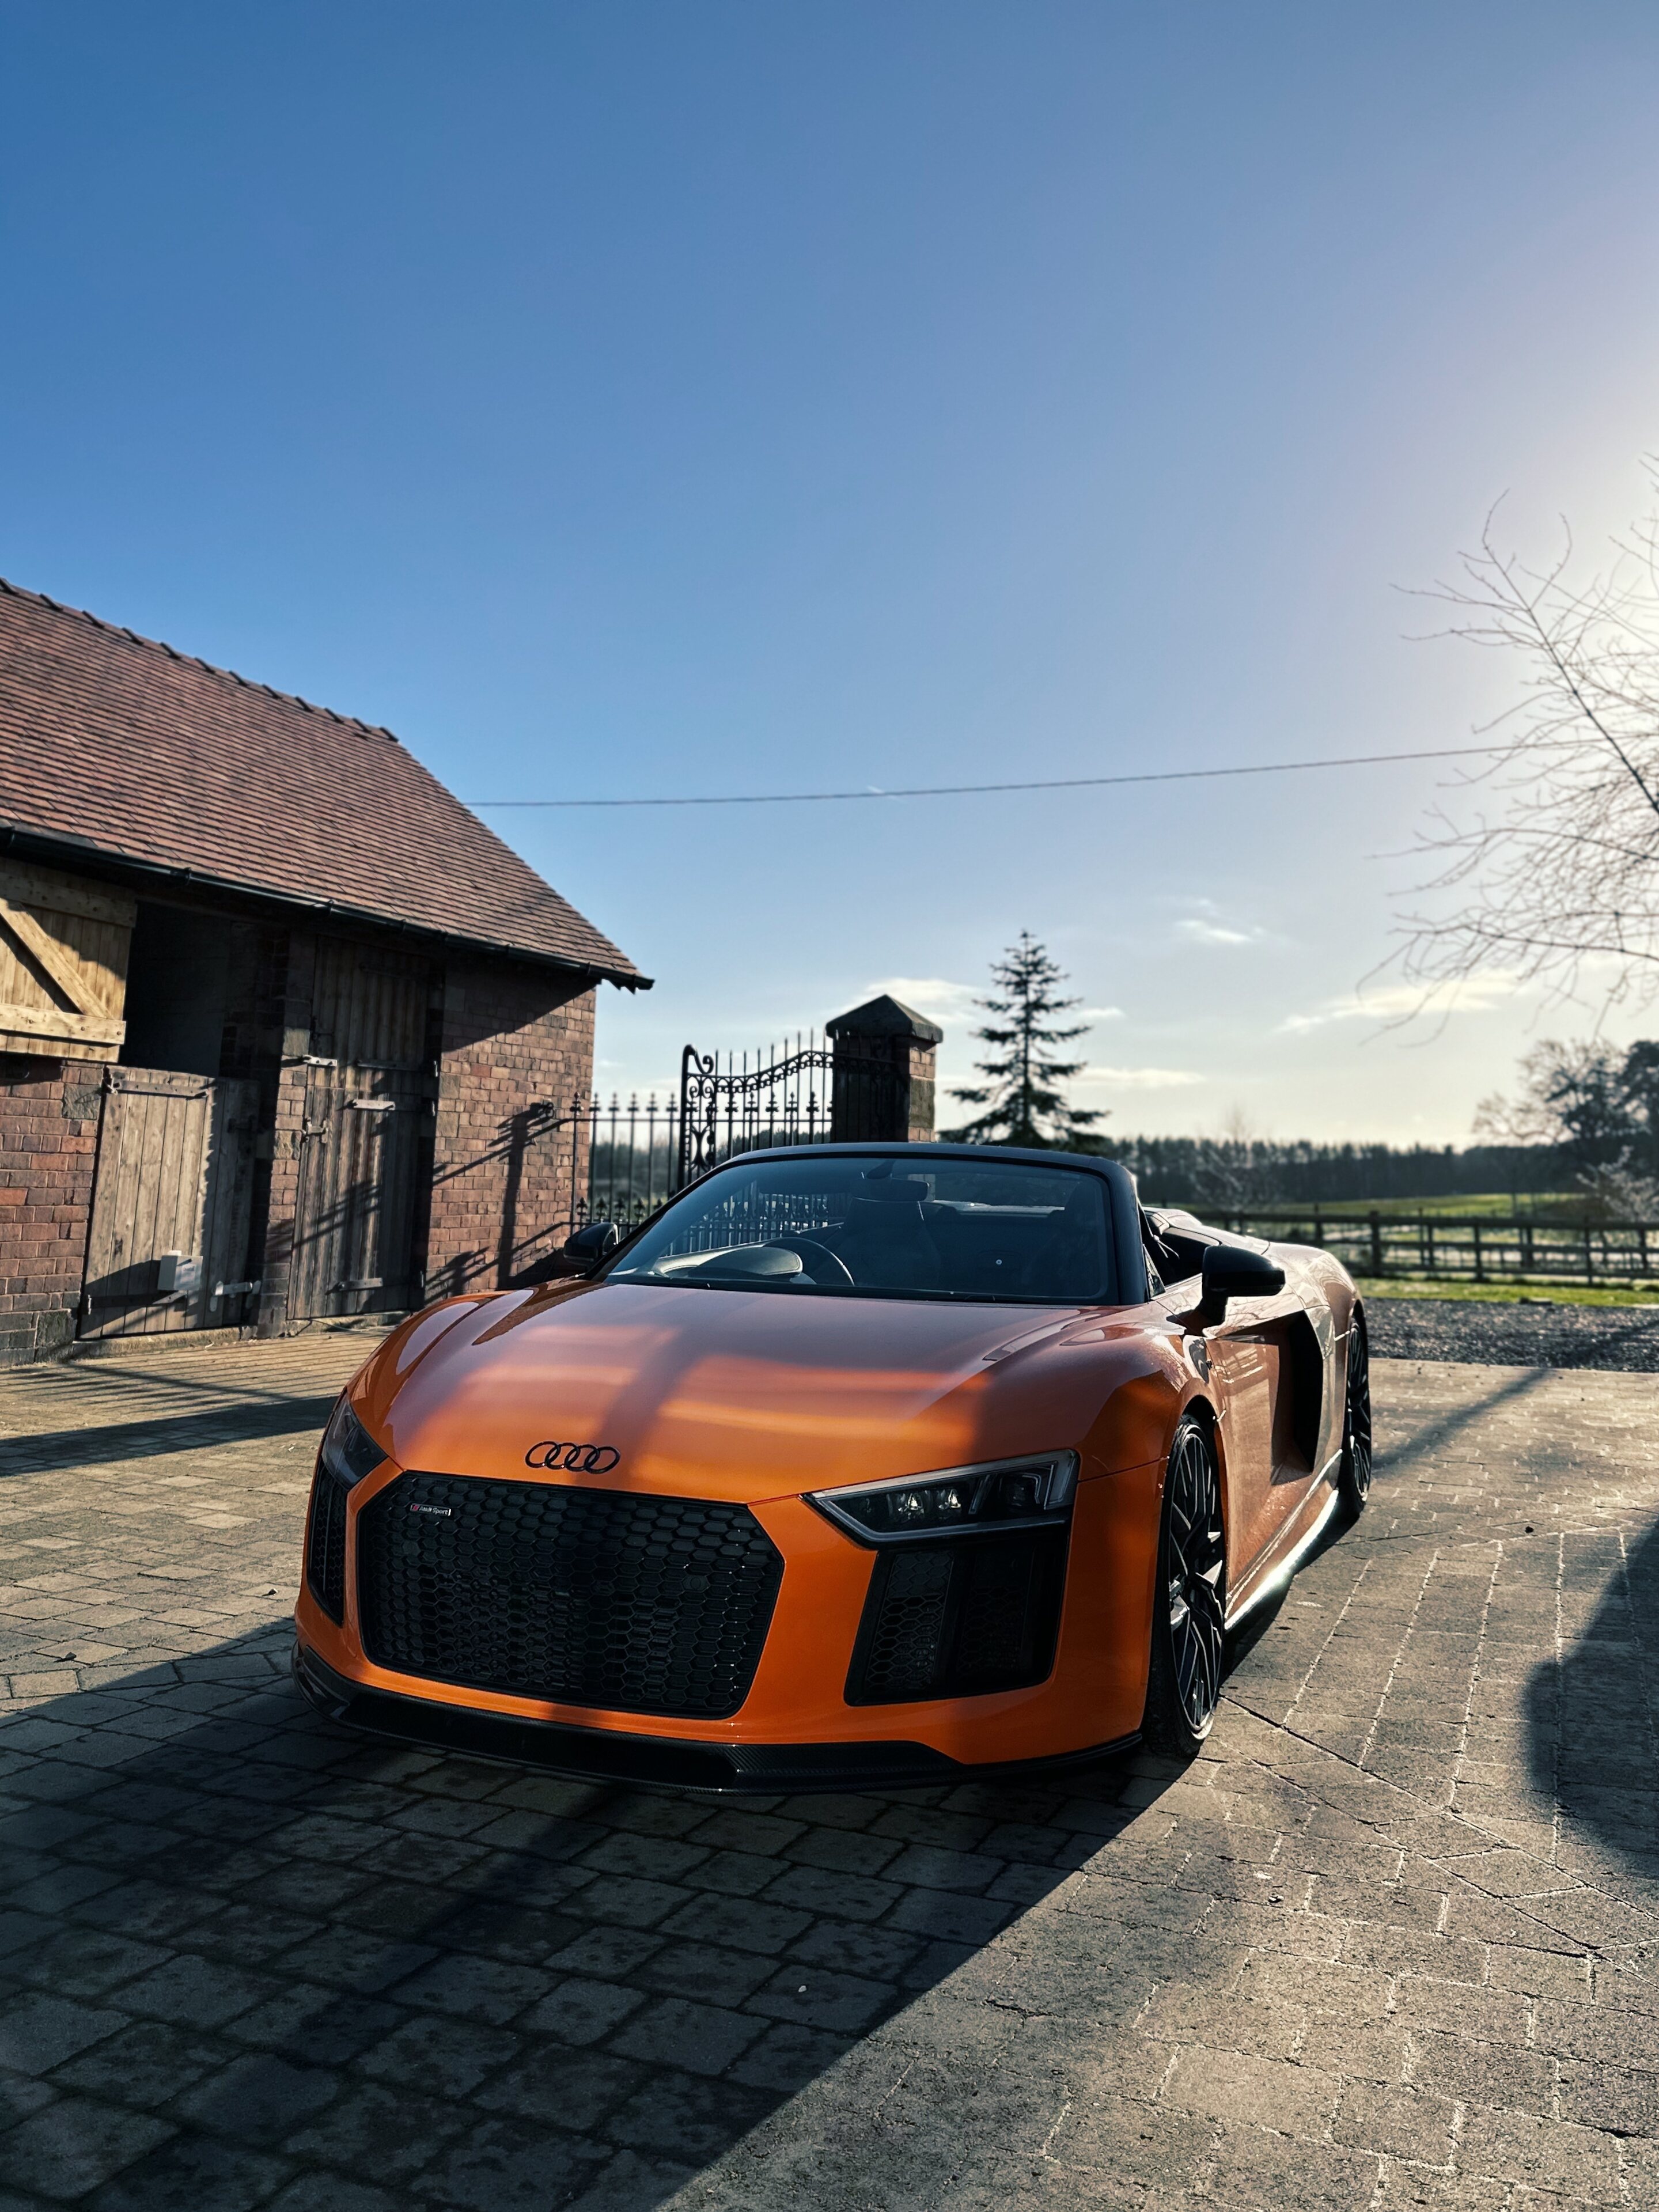 Orange Audi R8 V10 Plus Spyder  - Page 1 - Readers' Cars - PistonHeads UK - The image depicts a luxurious sports car, painted in vibrant shades of orange and black. It's parked on a concrete driveway in front of a traditional wooden barn with a gabled roof. The sky above is clear, suggesting it might be a sunny day. In the background, there's a glimpse of a house and trees, adding to the rural setting. The car itself is sleek and modern, featuring the signature Audi emblem on its grill. Its shiny exterior reflects the surrounding environment.